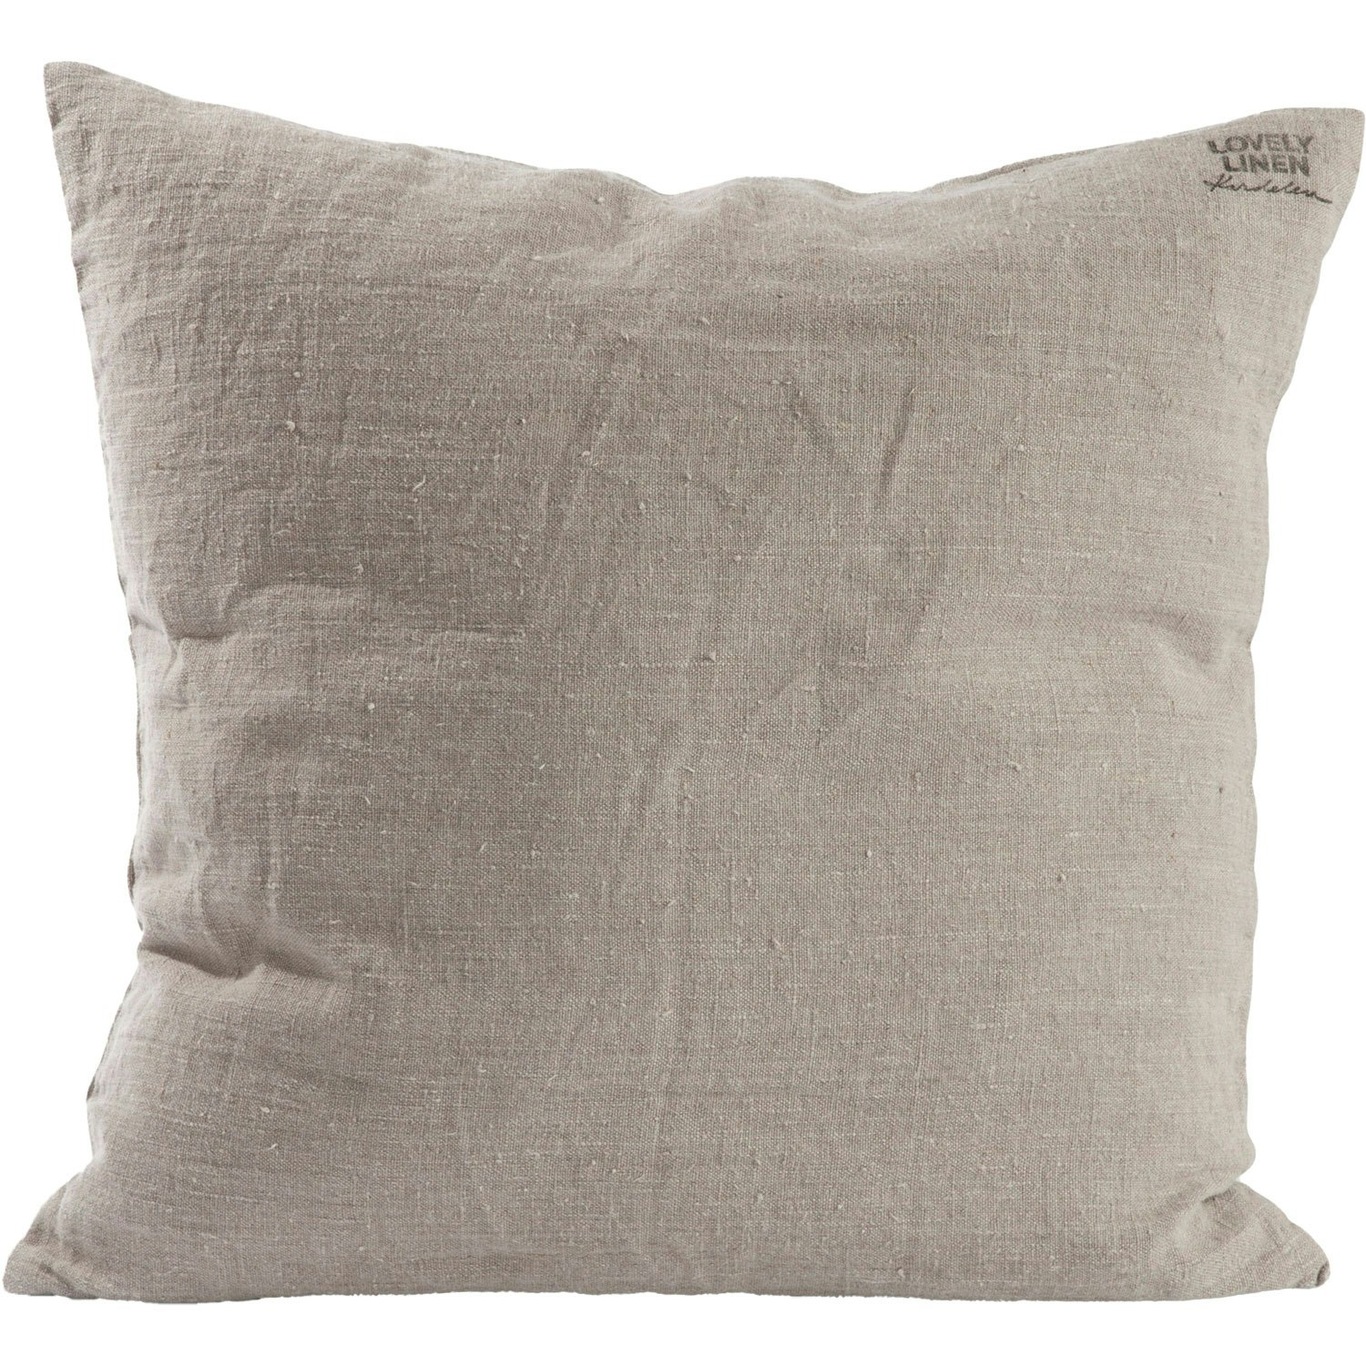 Lovely Cushion Cover 60x60 cm, Natural Beige